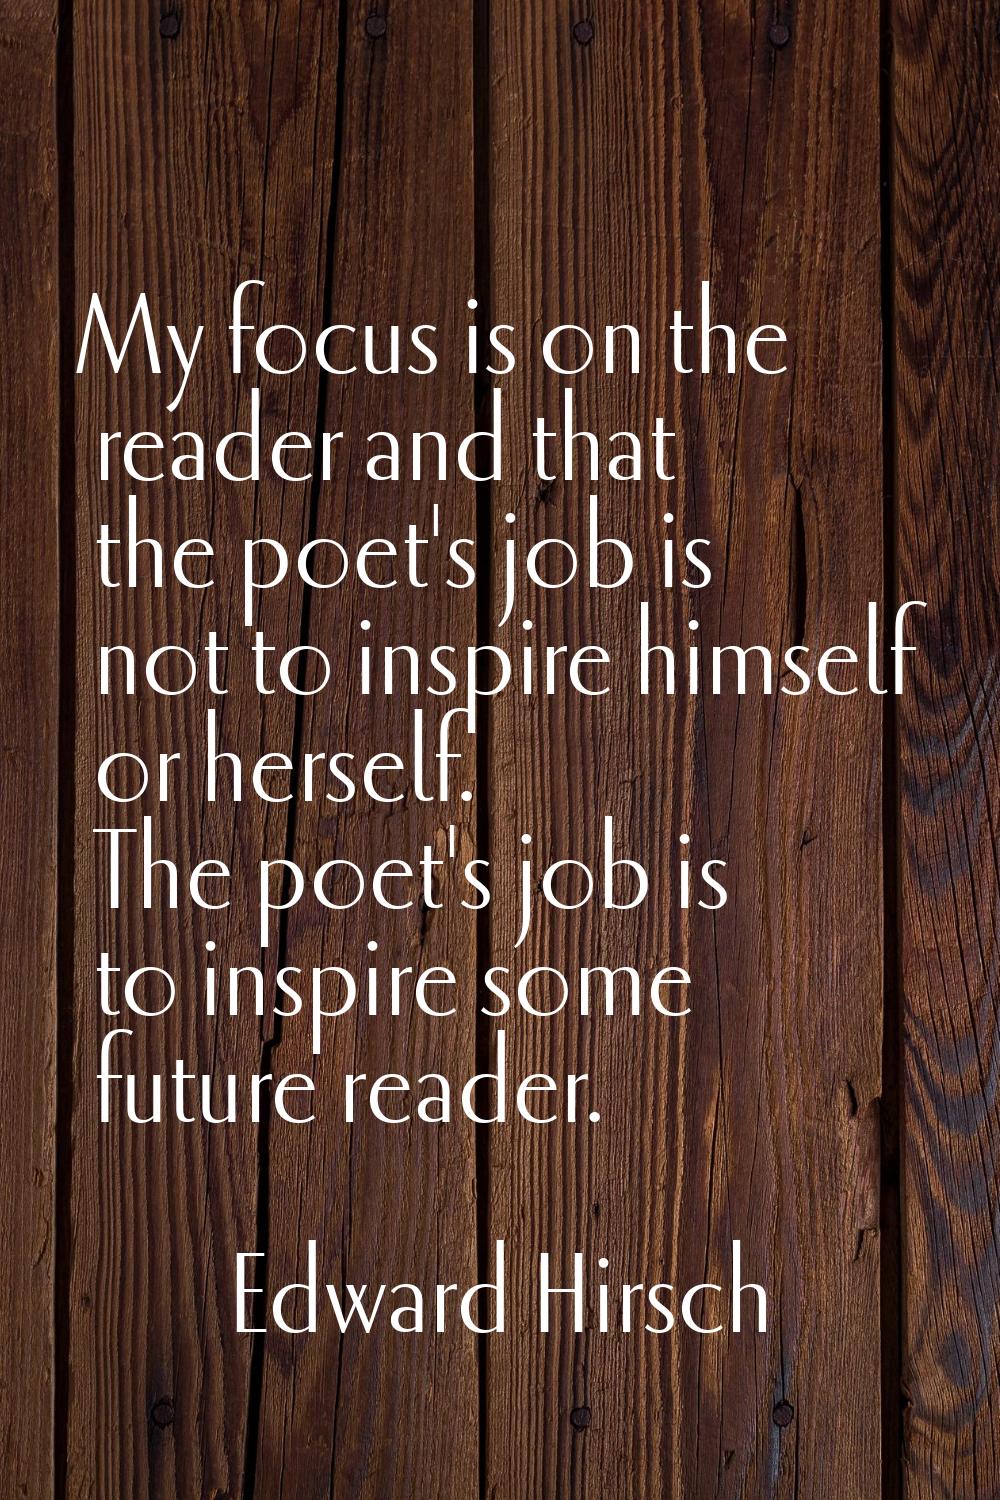 My focus is on the reader and that the poet's job is not to inspire himself or herself. The poet's 